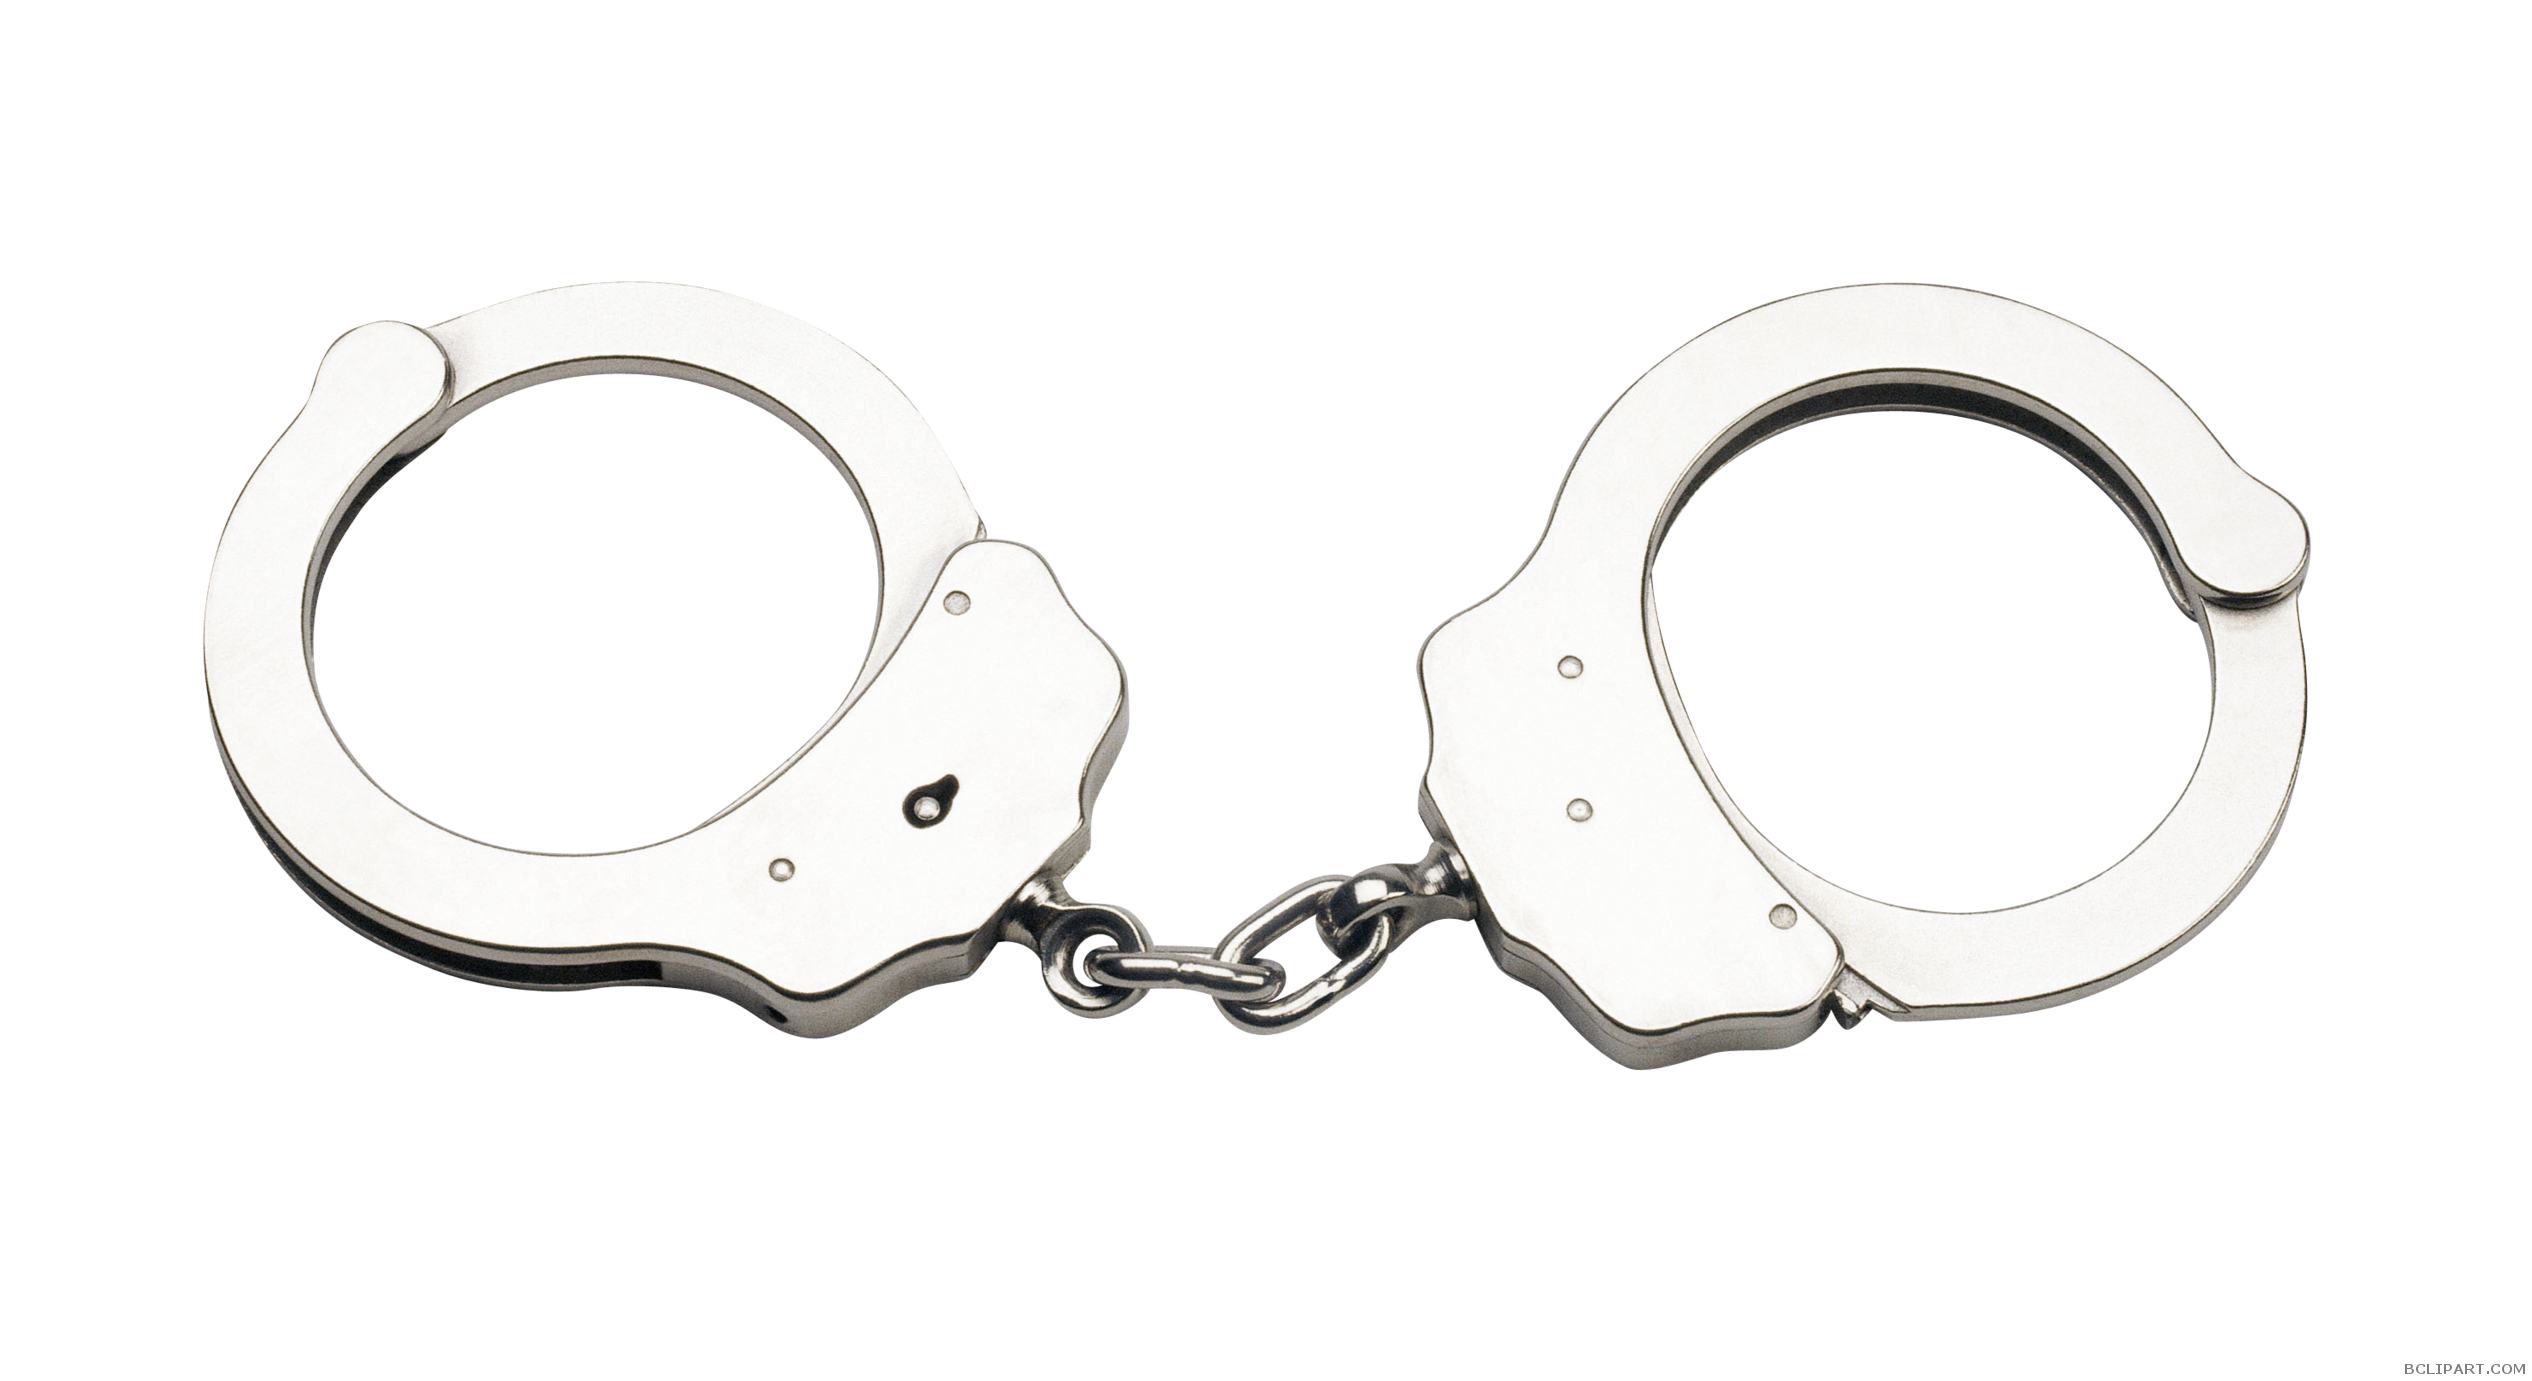 Handcuffs bclipart tools free. Handcuff clipart pink